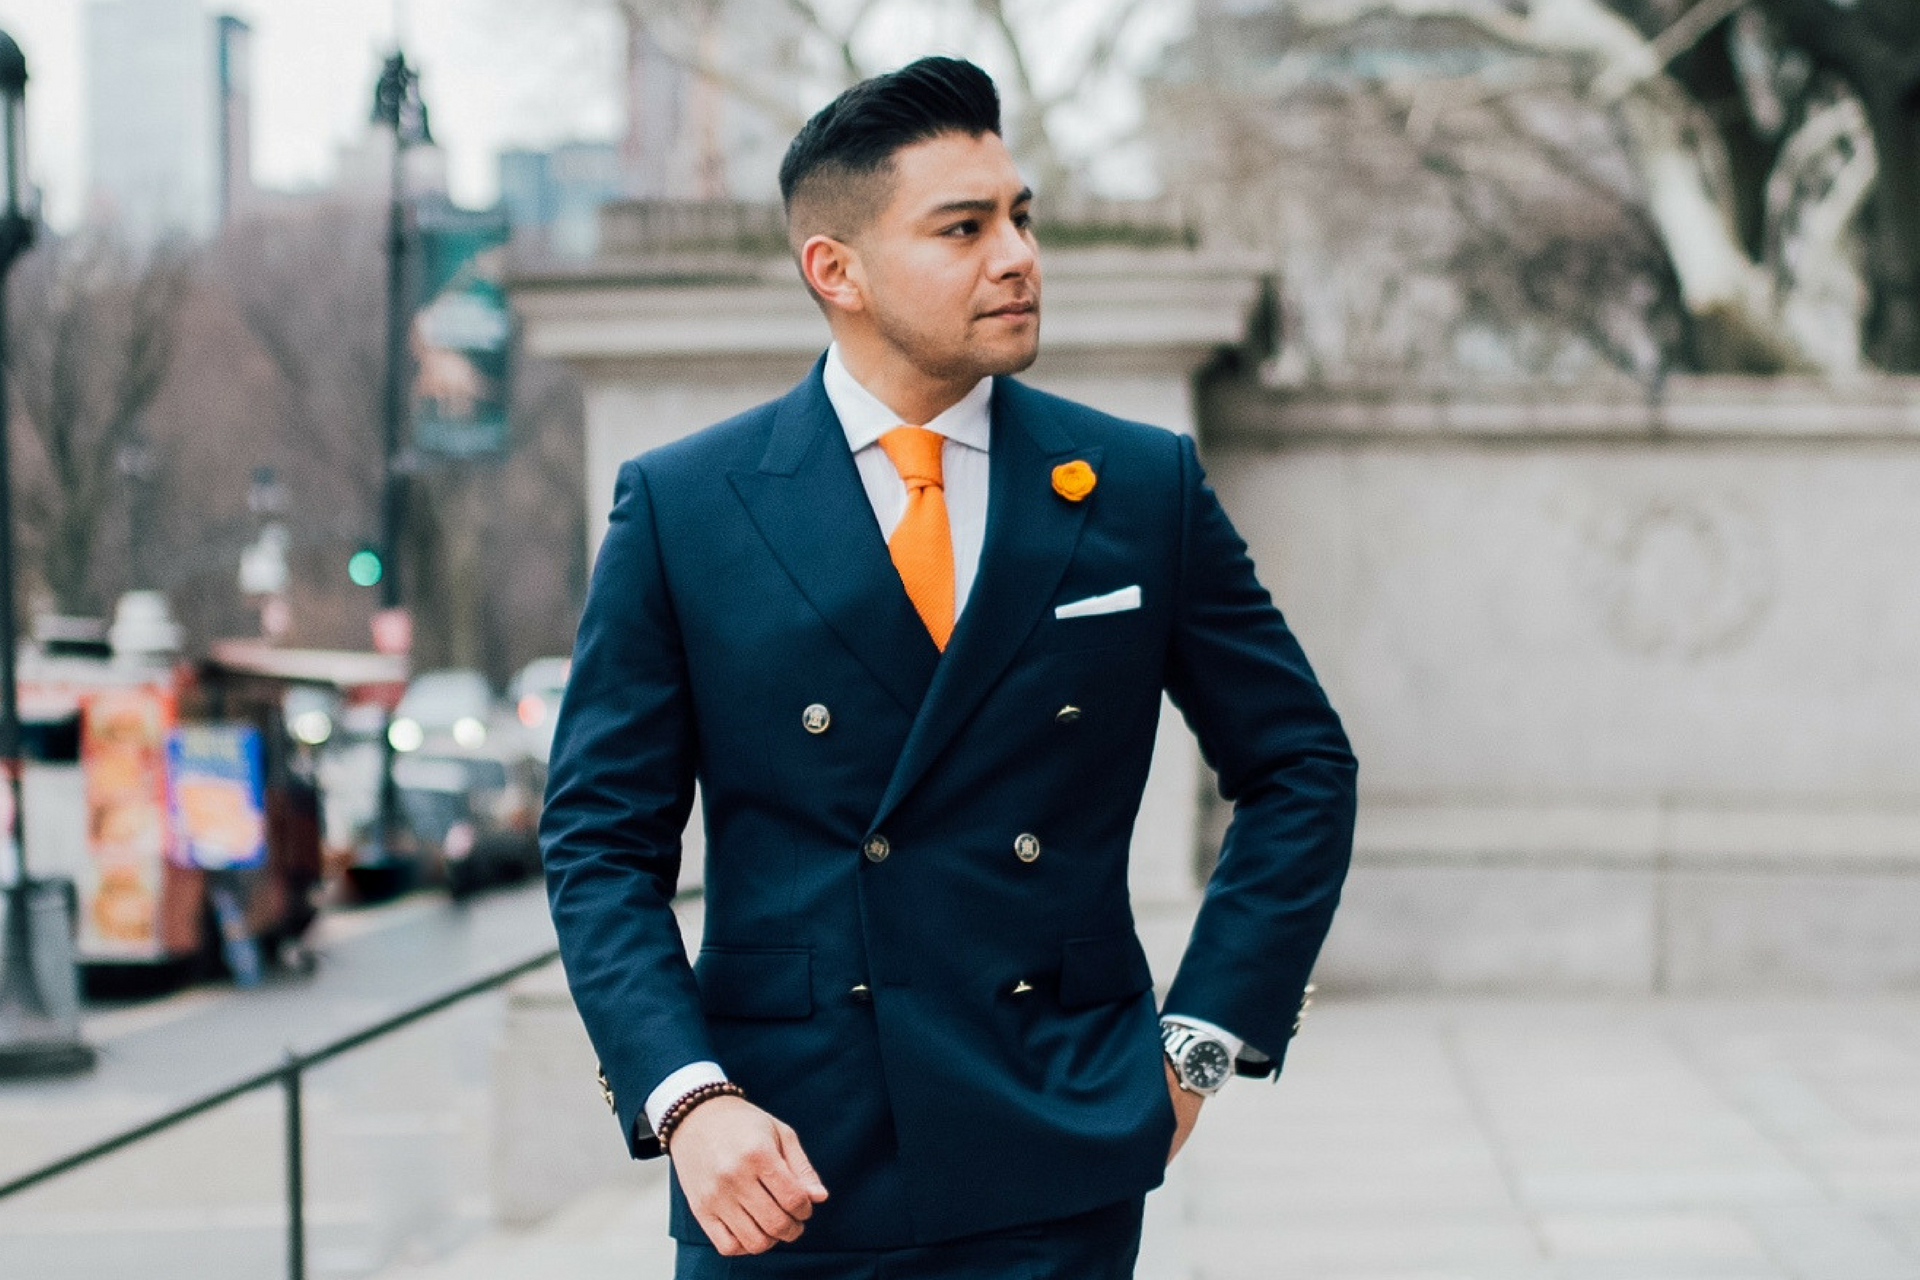 ONE DOUBLE-BREASTED SUIT: THREE WAYS - navy suit - dandy in the bronx